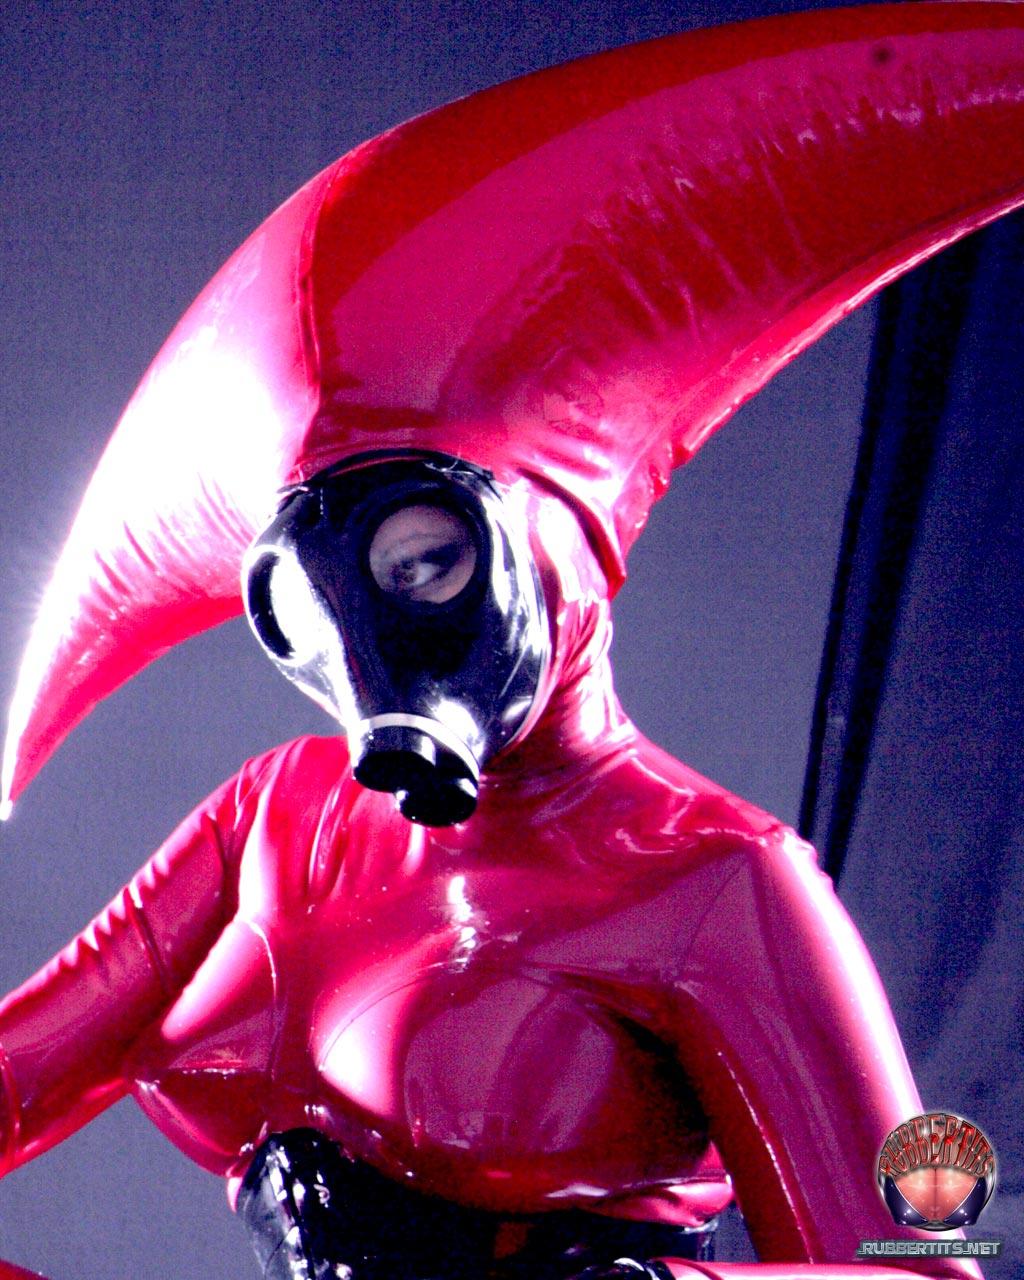 Lesbians Darkwing Zero & Lady Cassandra wear latex costumes during SFW play photo porno #422975545 | Rubber Tits Pics, Darkwing Zero, Lady Cassandra, Latex, porno mobile